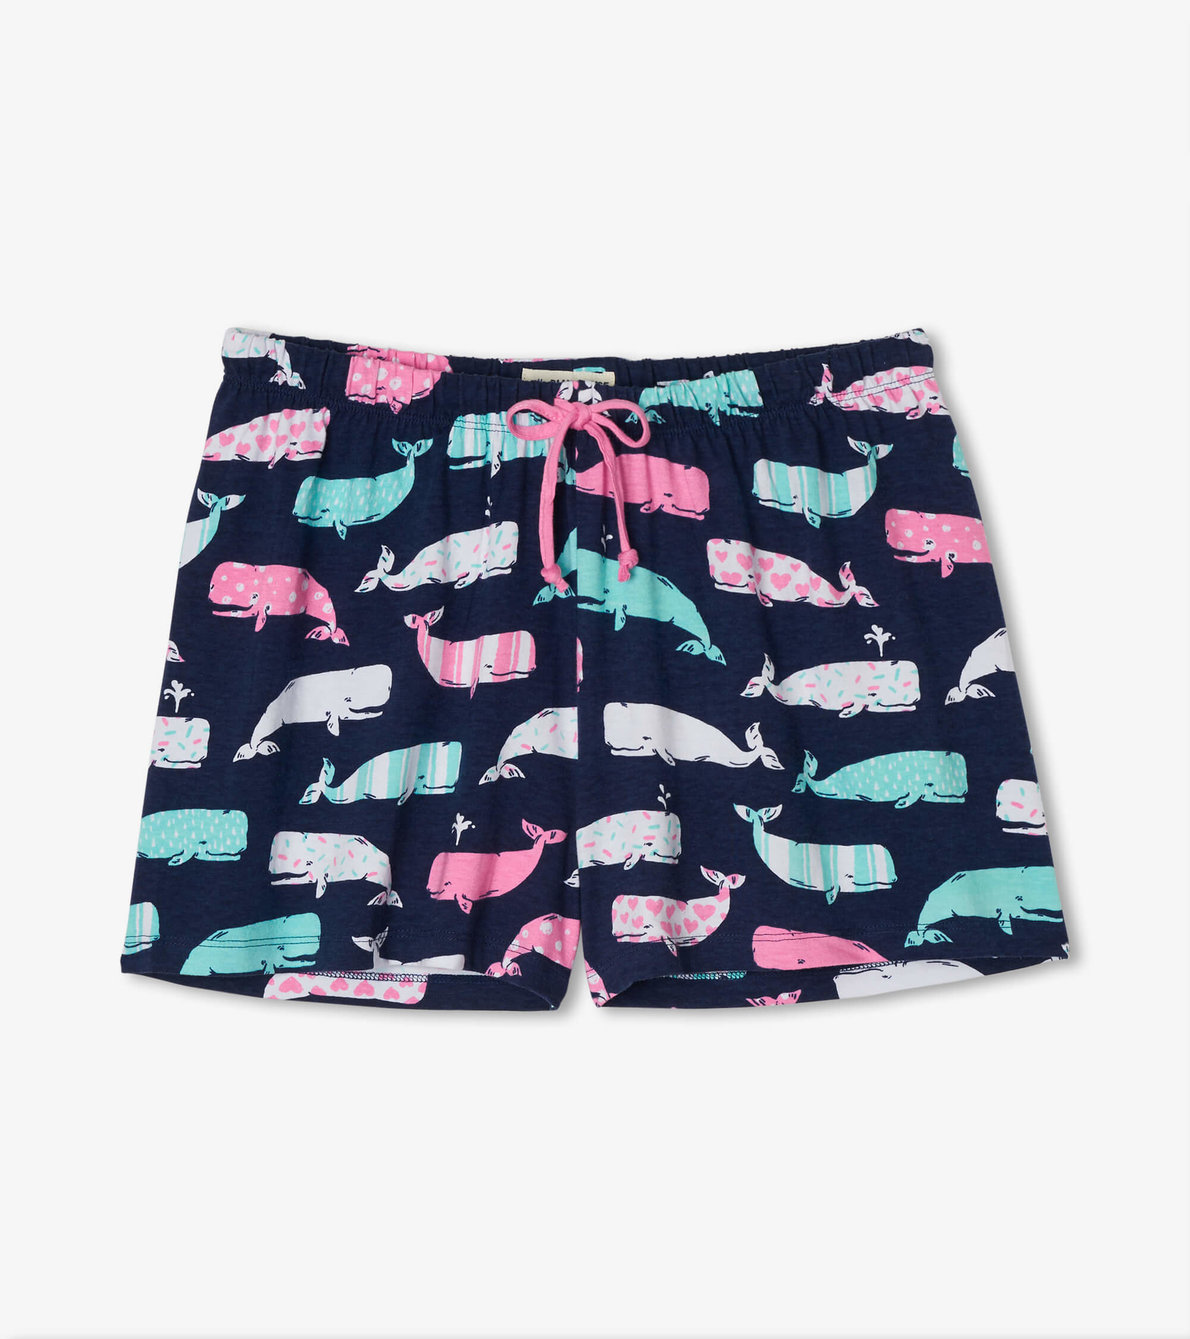 View larger image of Nautical Whales Women's Sleep Shorts